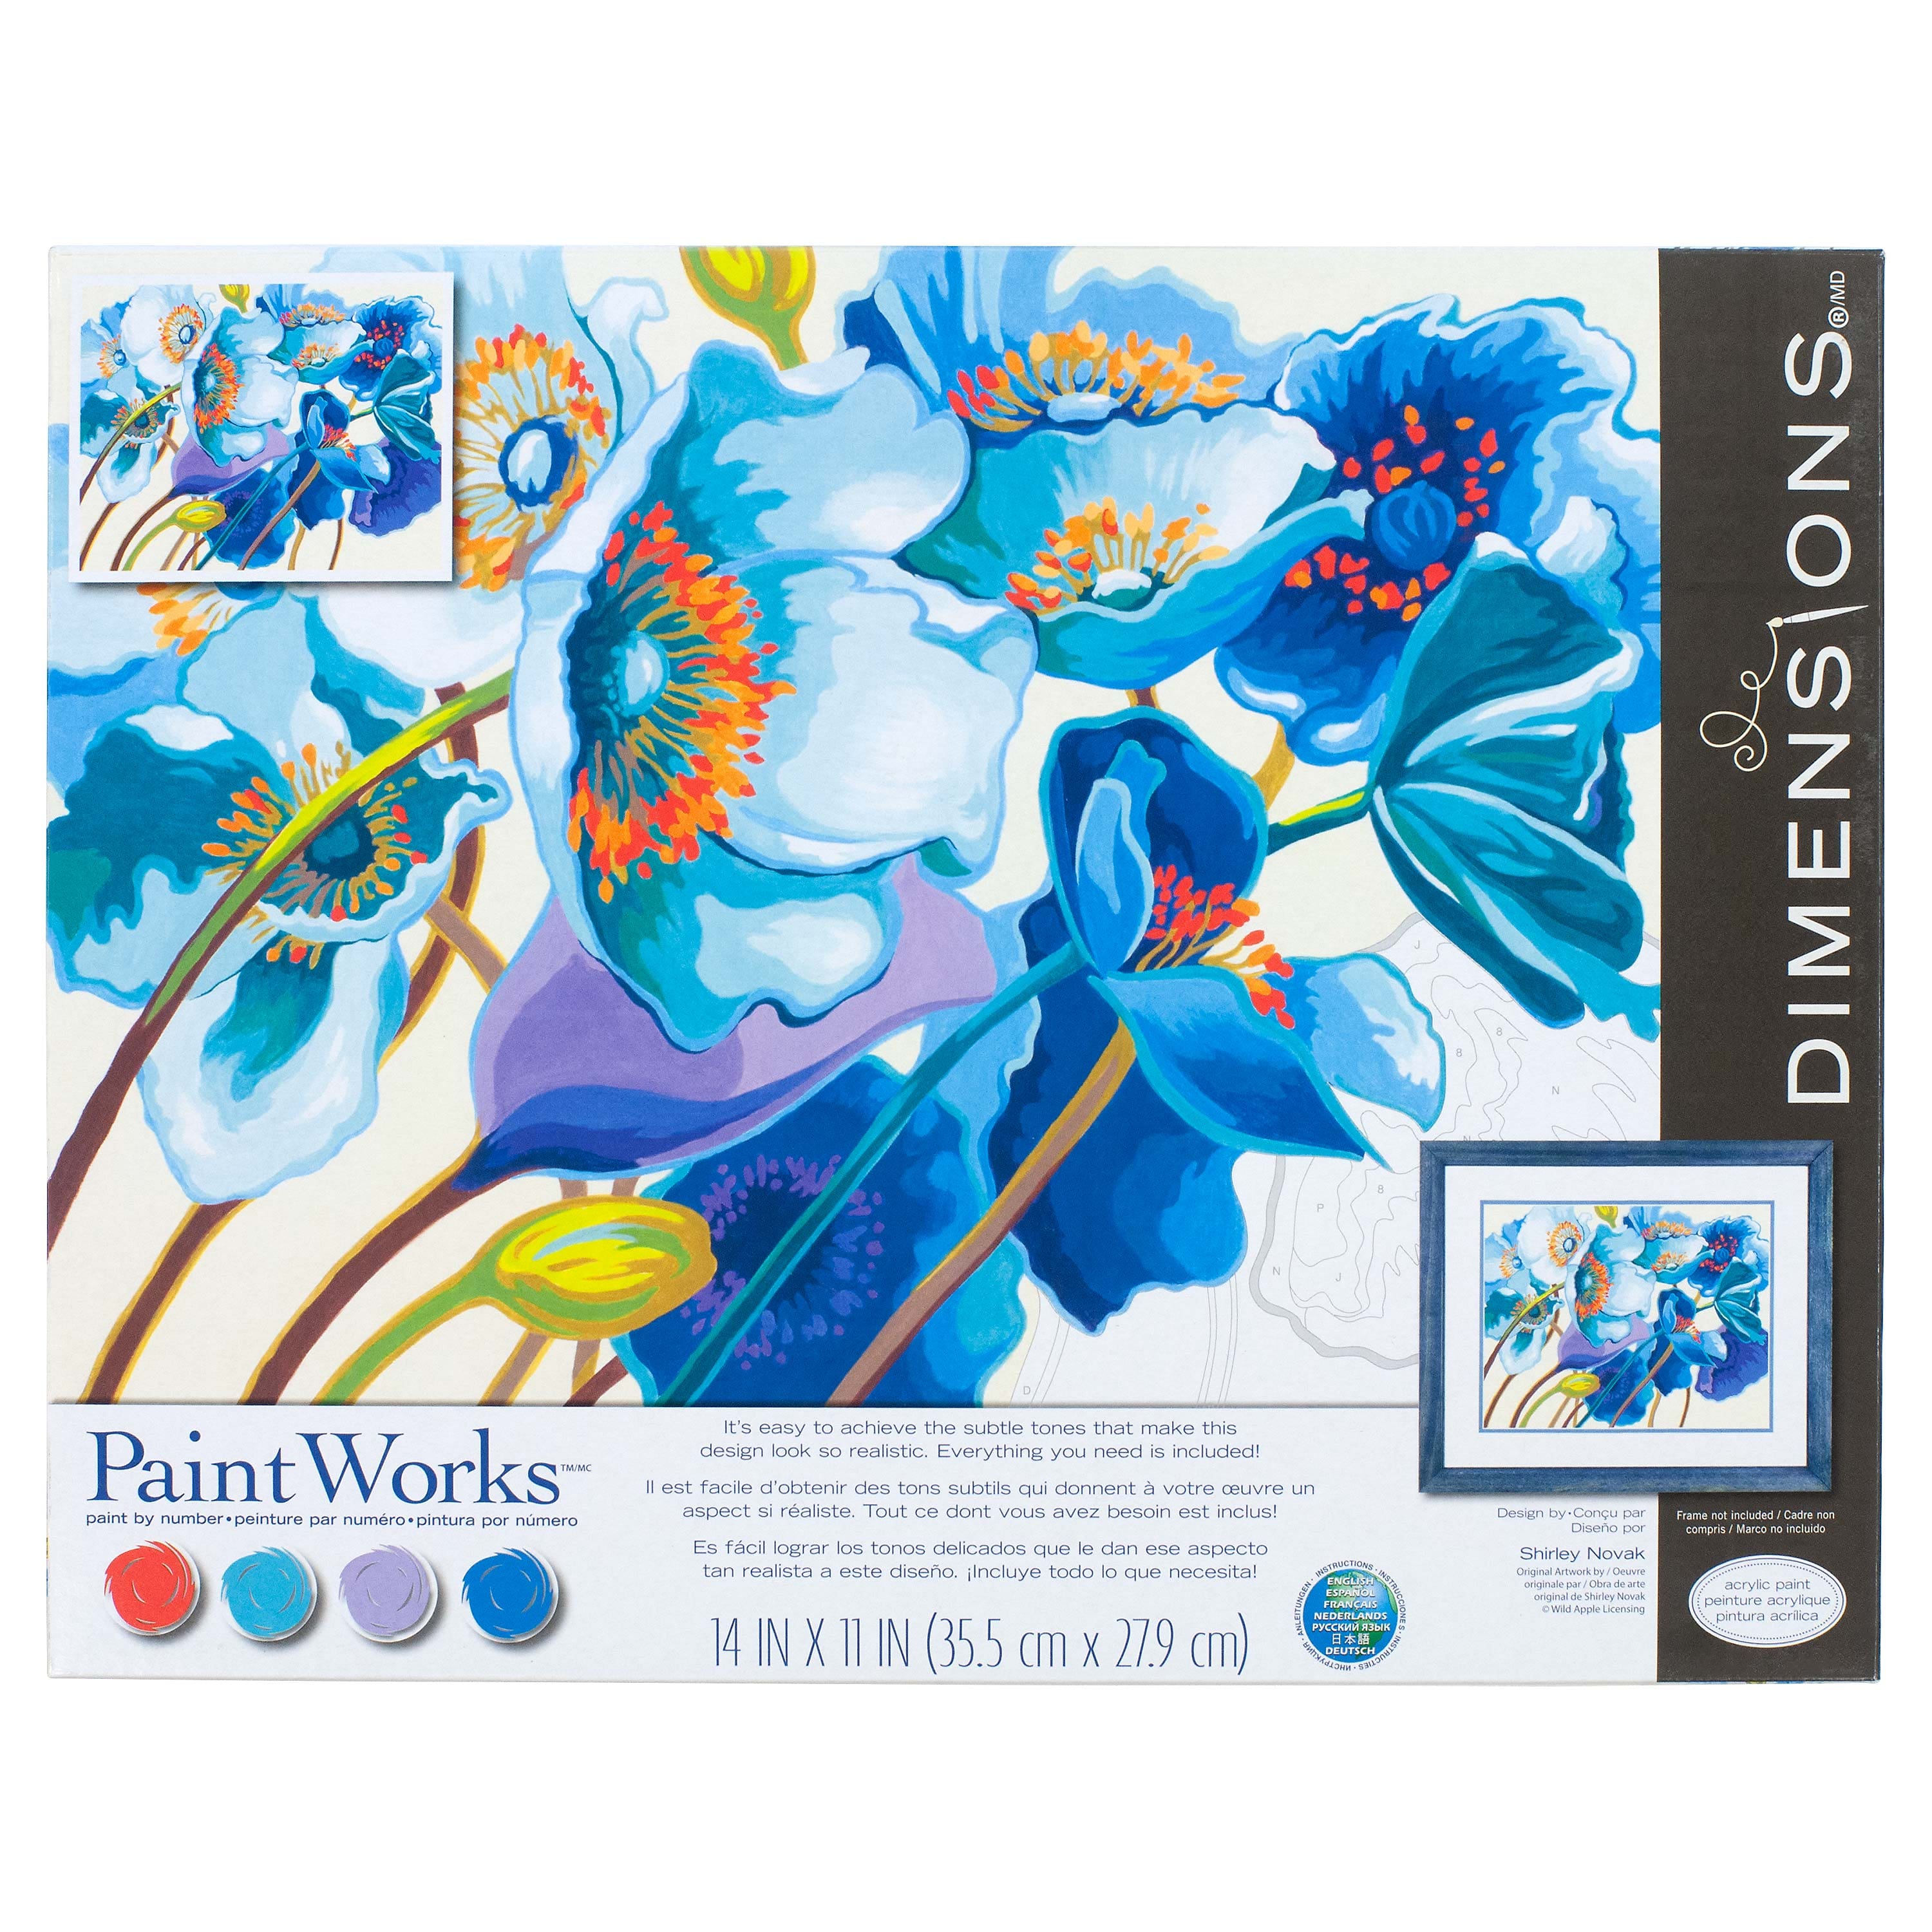 Paint and sip DIY craft kit, paint by numbers – My-Whys